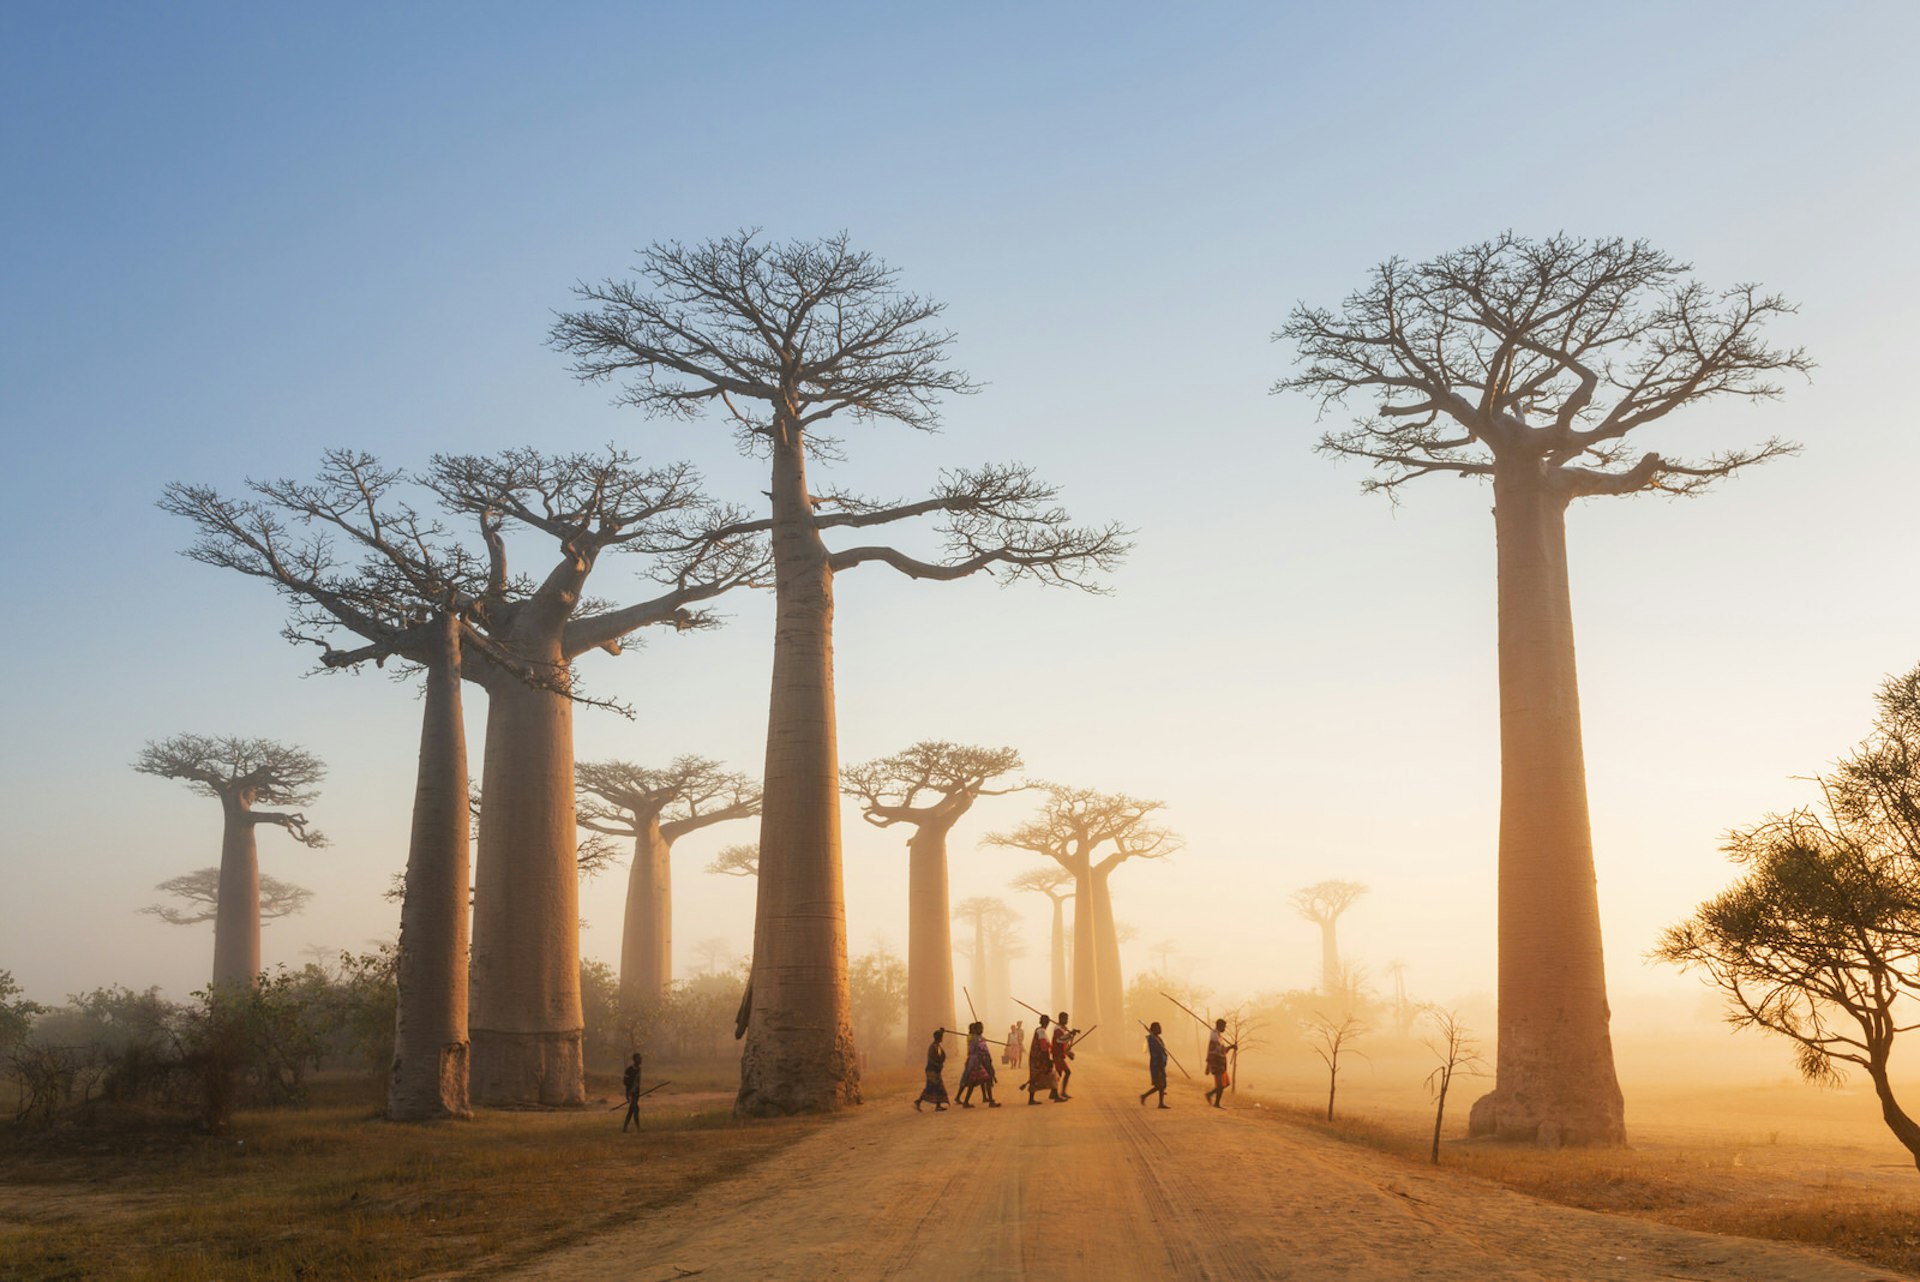 The iconic Avenue of the Baobabs is a reminder of how Madagascar used to be before rampant deforestation © Justin Foulkes / Lonely Planet